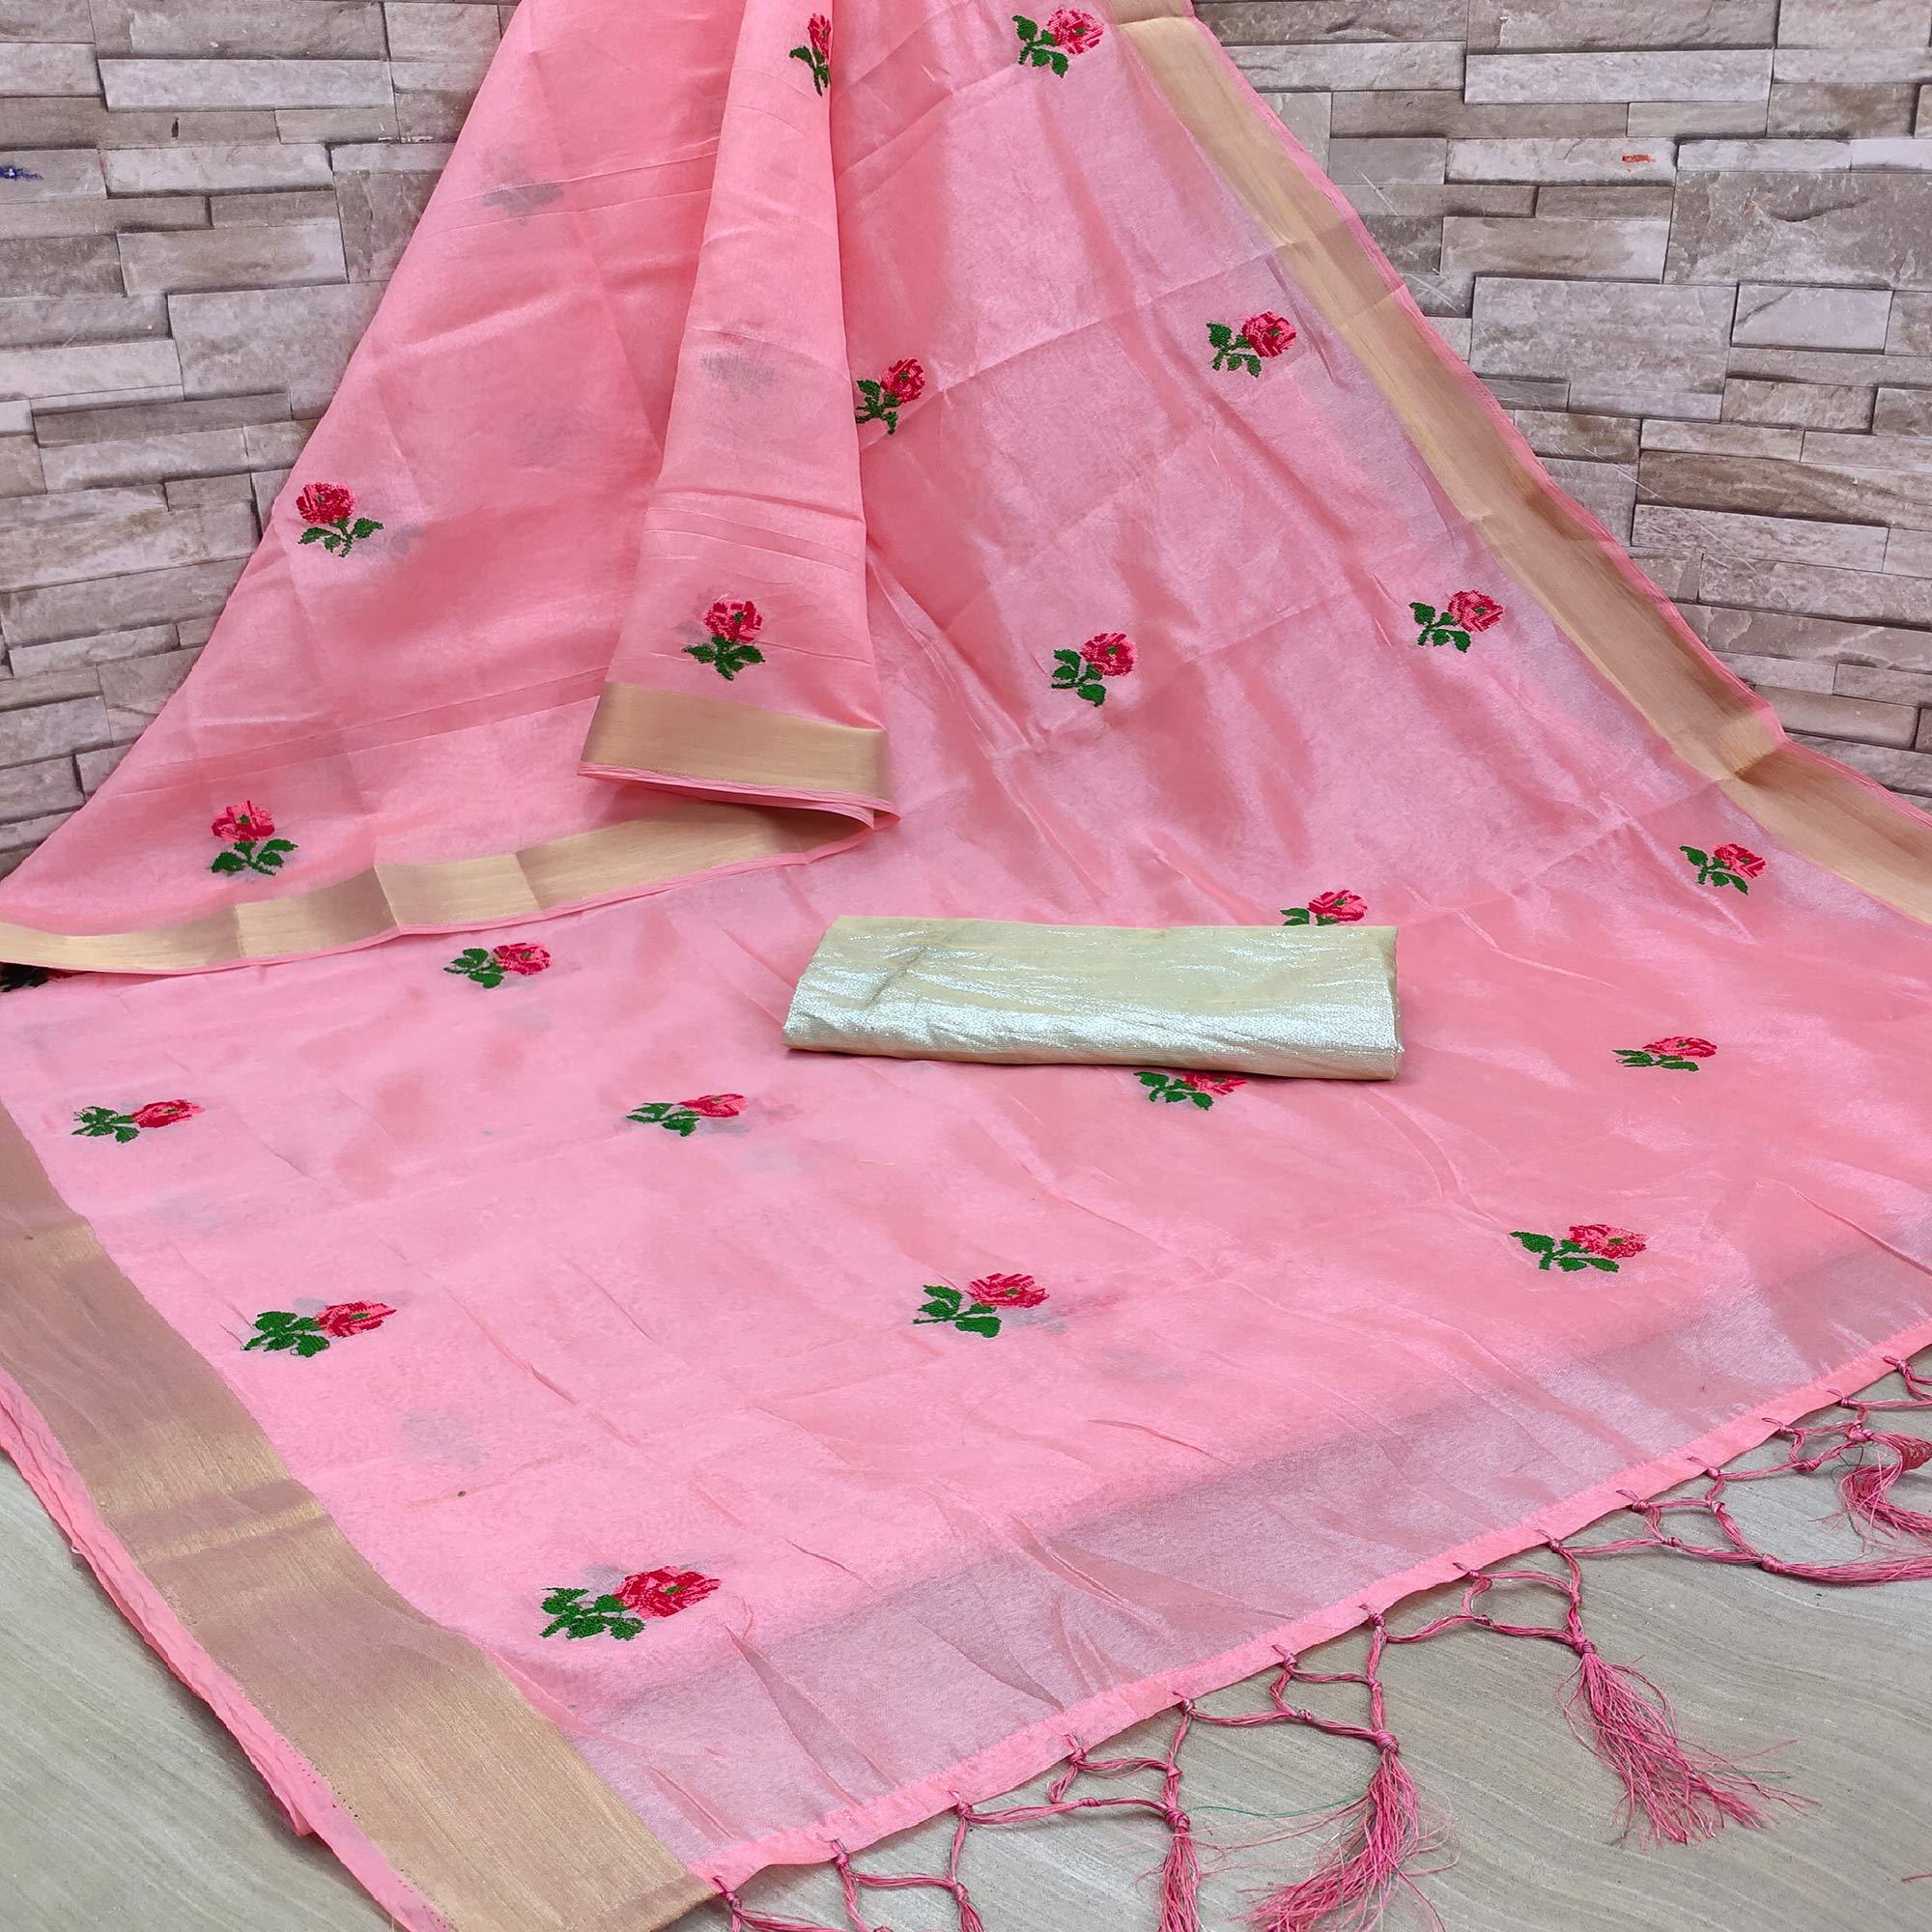 Pink Festive Wear Floral Embroidered Manipuri Silk Saree With Tassels - Peachmode